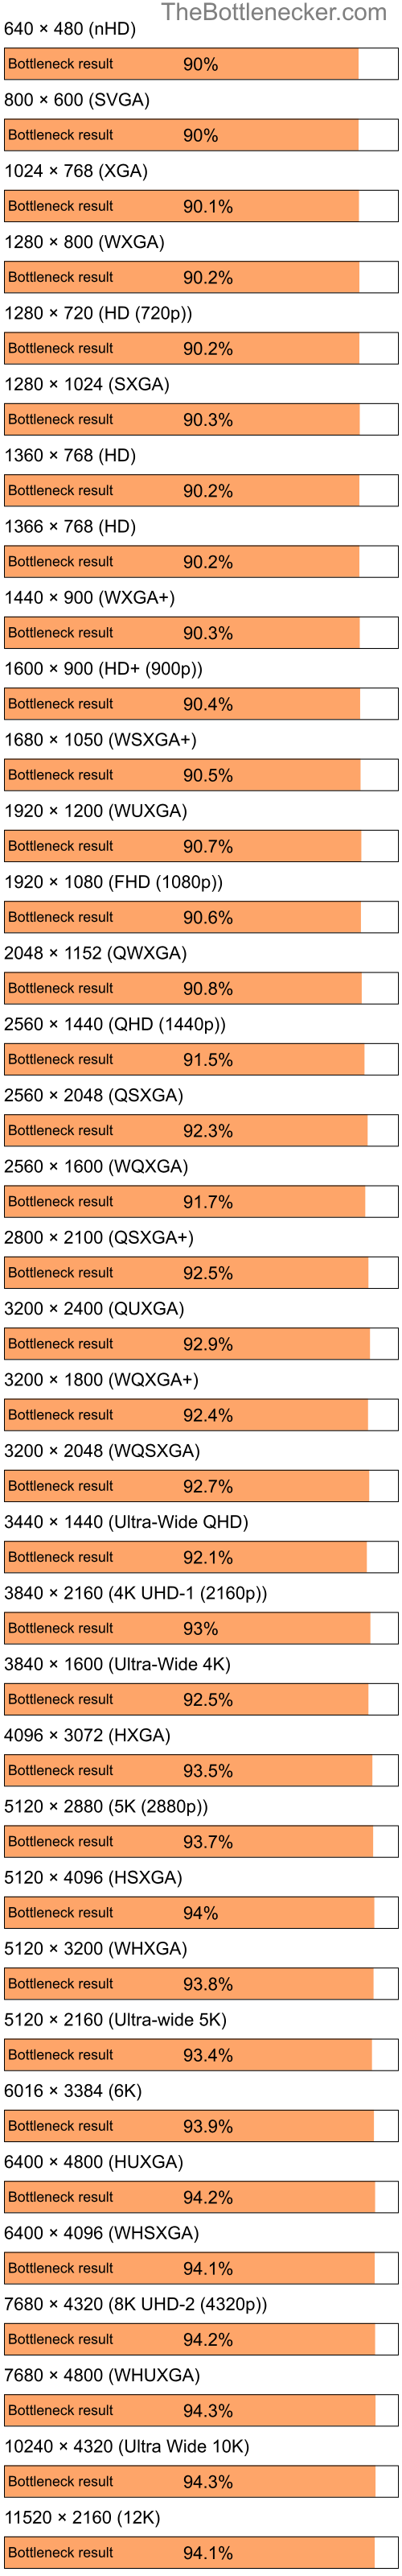 Bottleneck results by resolution for Intel Celeron M 420 and NVIDIA GeForce FX 5200 in Graphic Card Intense Tasks